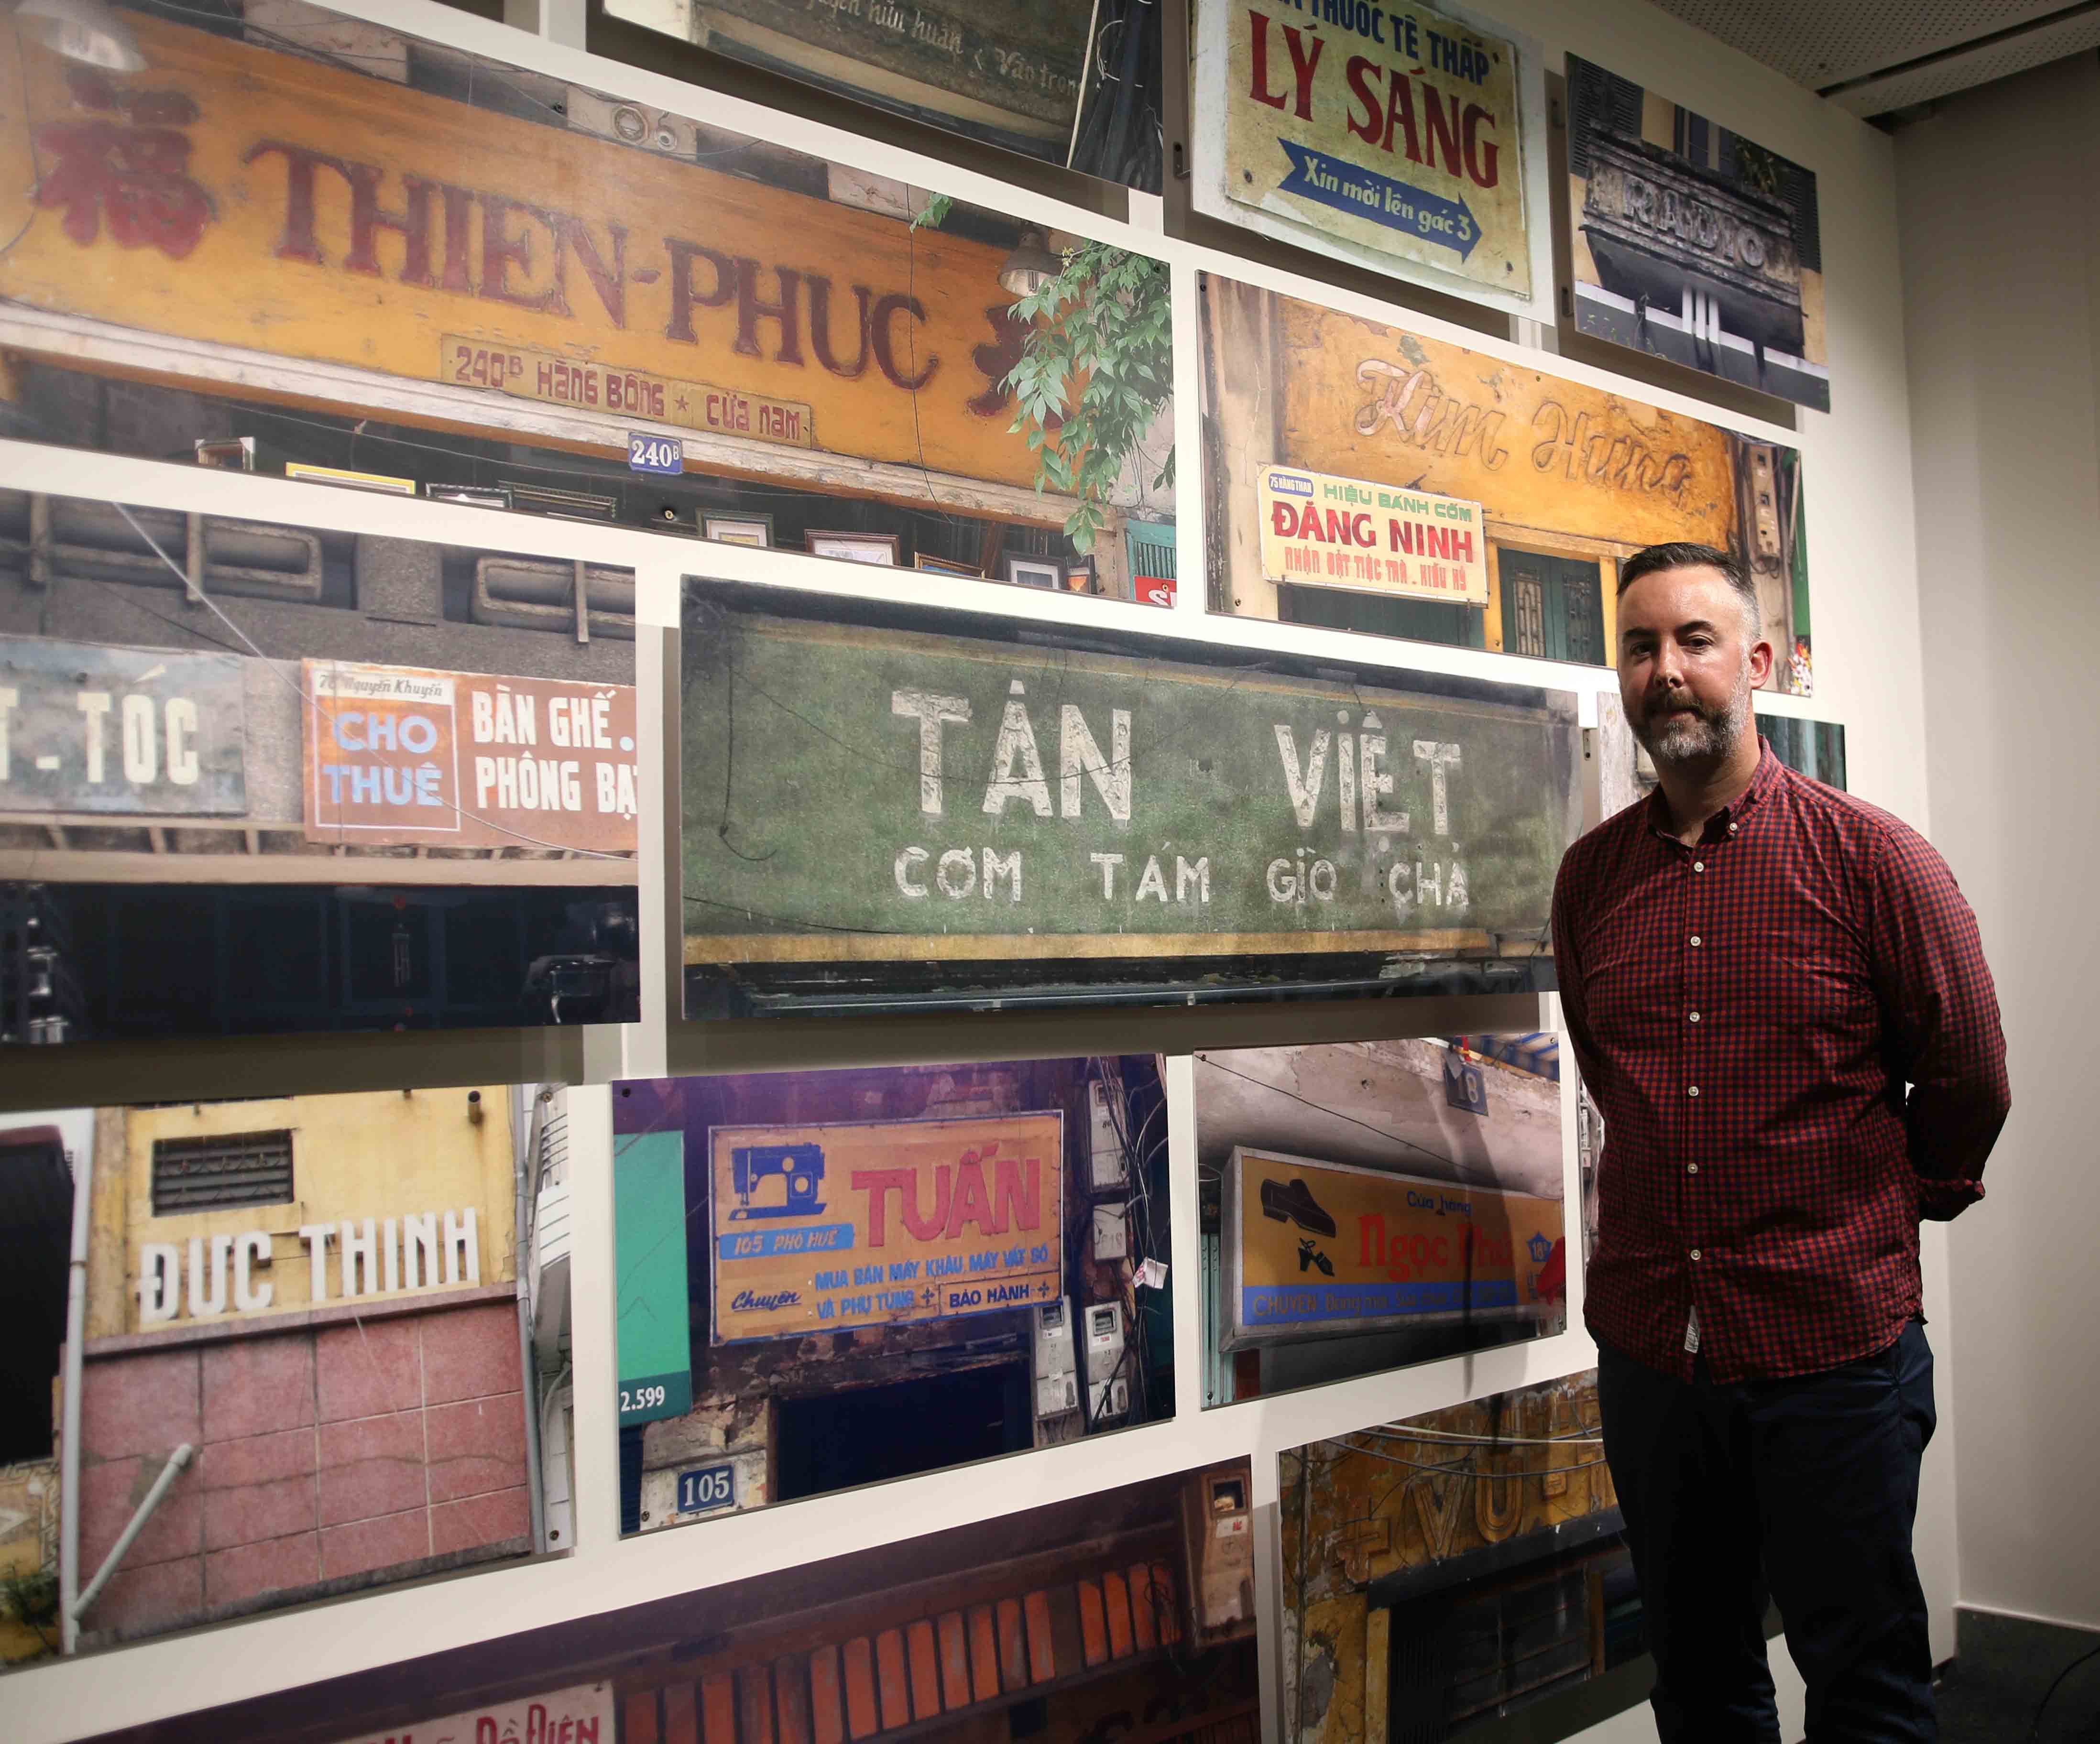 RMIT Vietnam Lecturer Simon Richards with the hand-painted signs he captured with his team in Hanoi’s Hoan Kiem District.